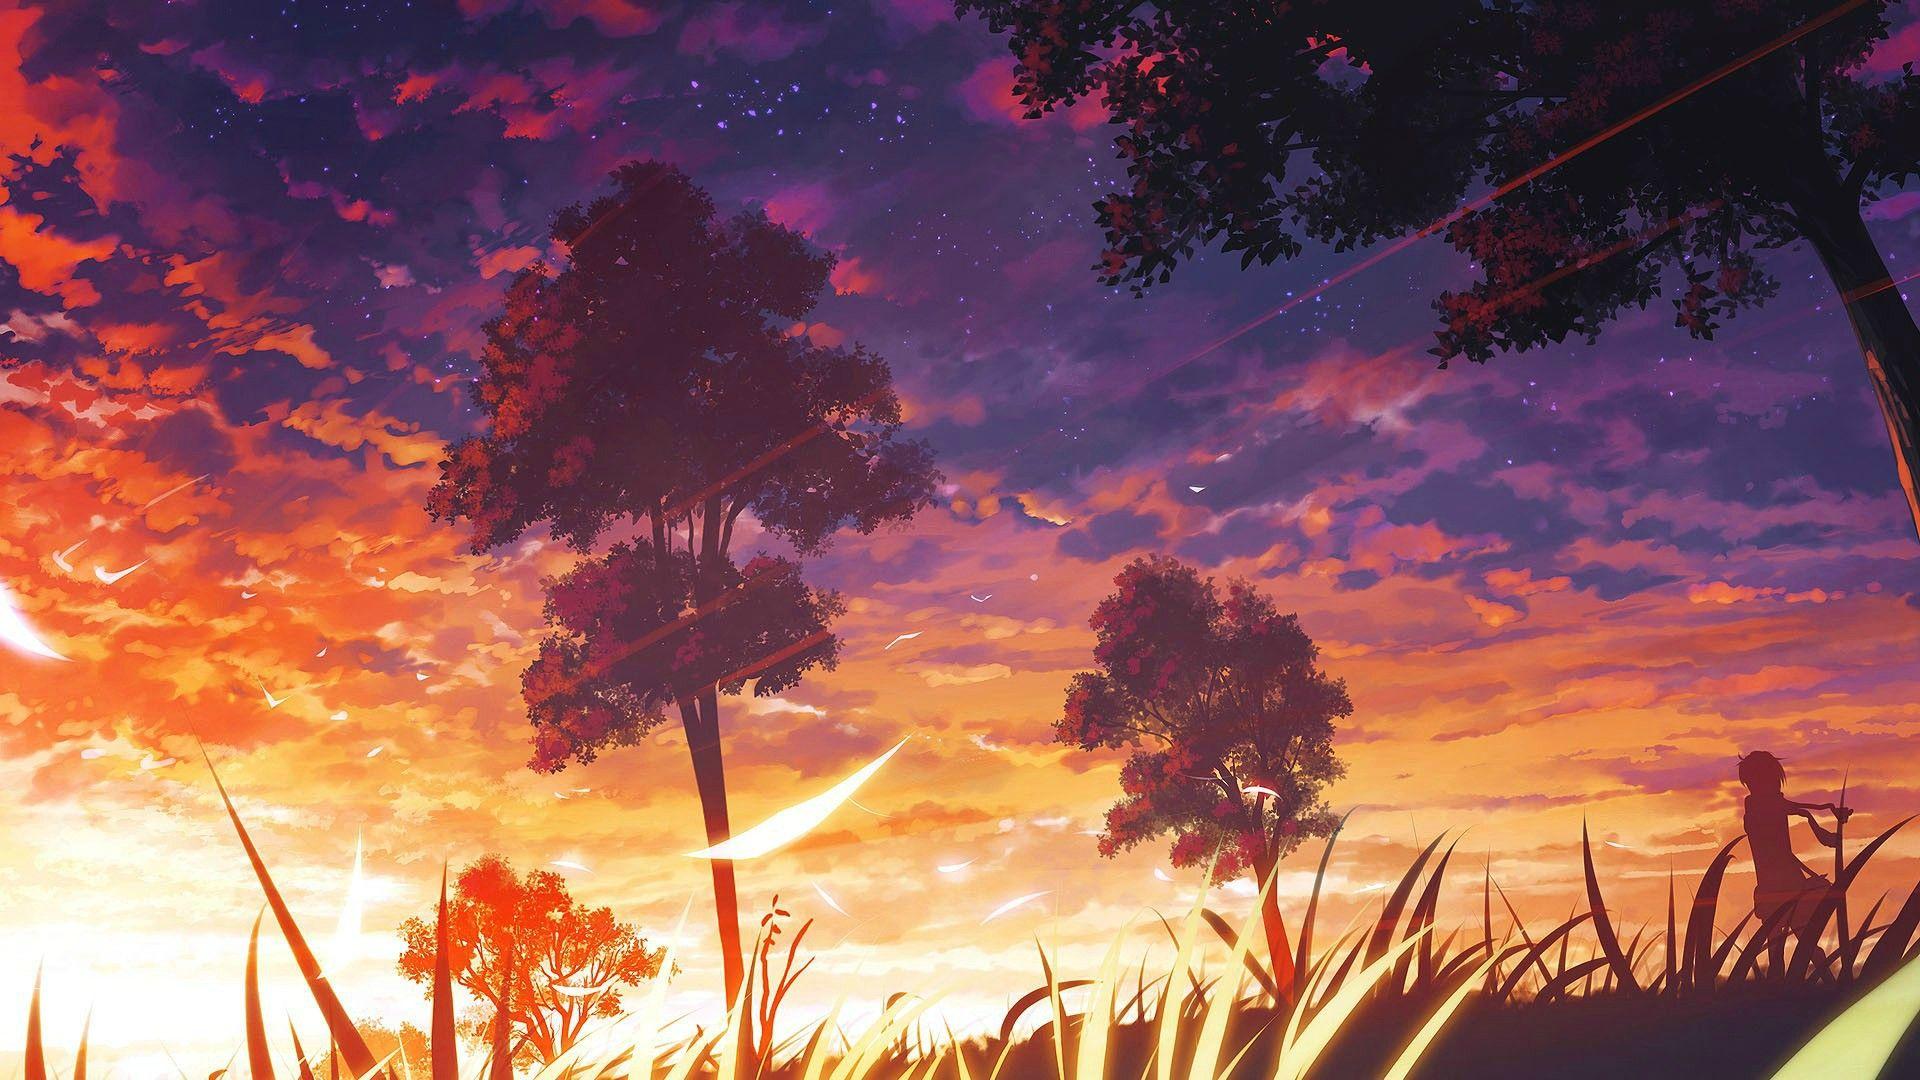 Anime Vibe Wallpapers - Top Free Anime Vibe Backgrounds ...